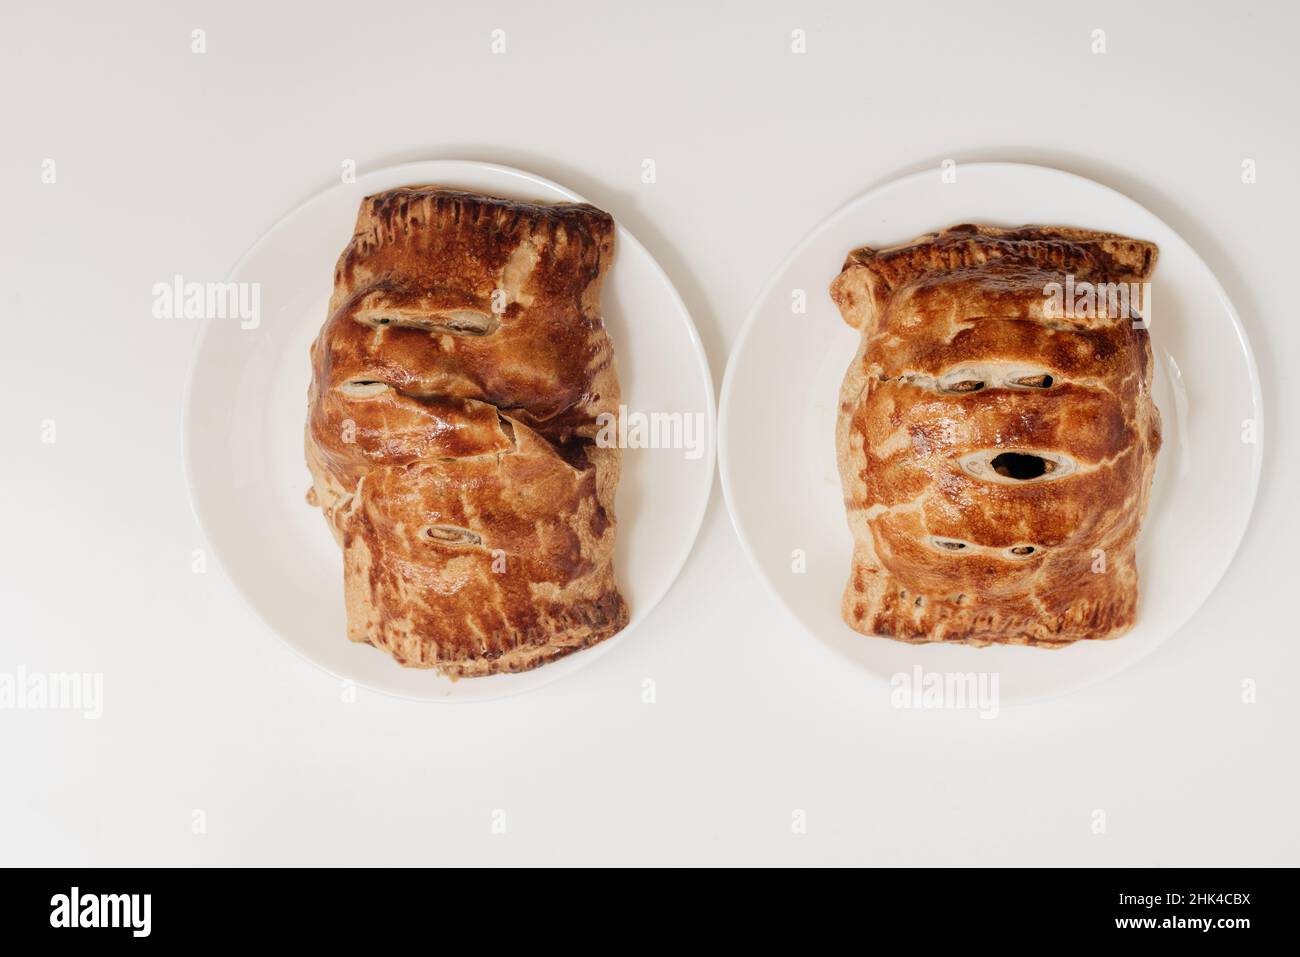 Two pieces of apple strudel, homemade, resting on a white surface  Stock Photo